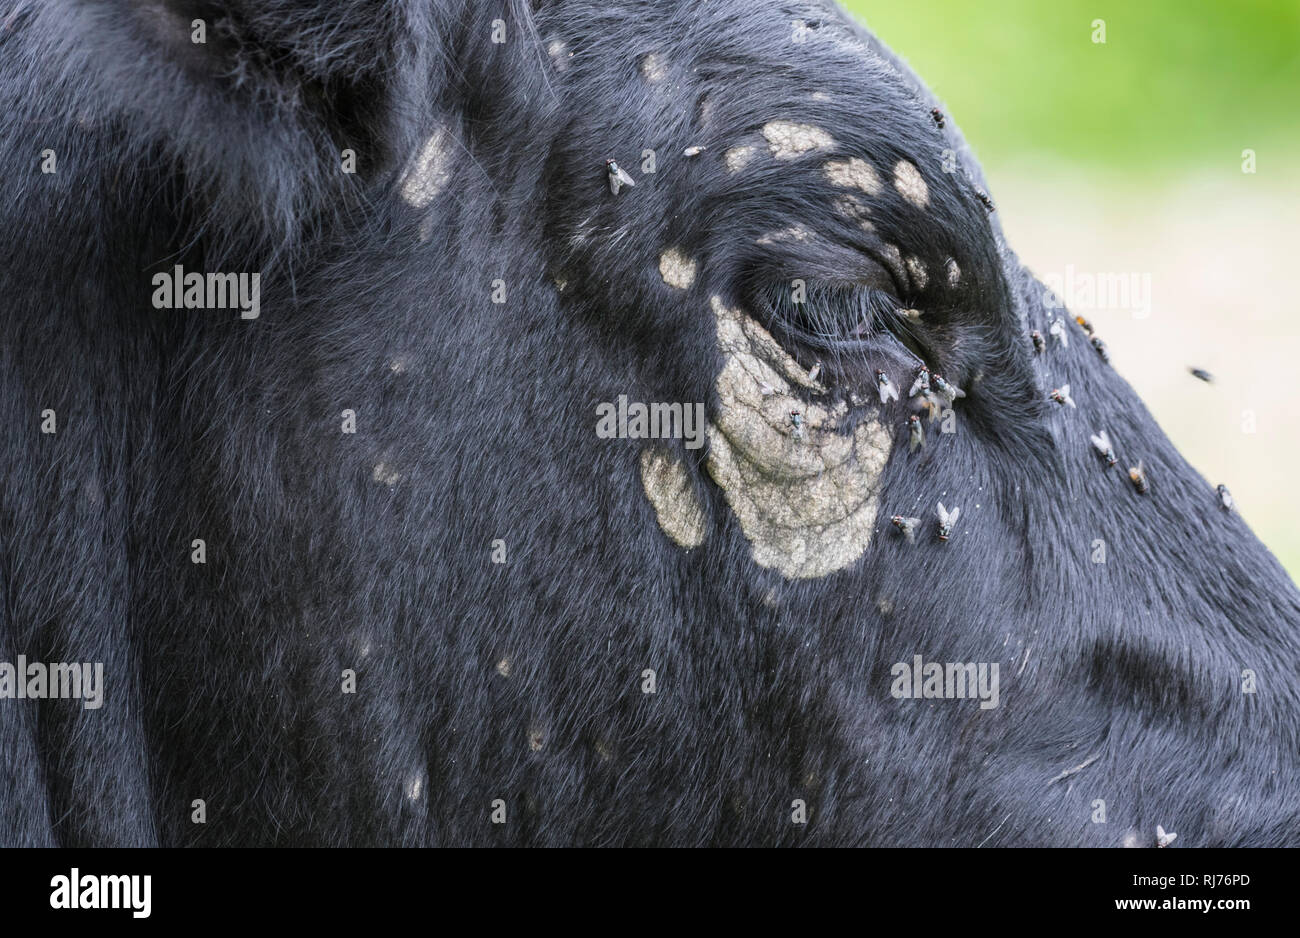 Flies on and around the eye of a black cow, with discolouration and white patches around the eye. Stock Photo